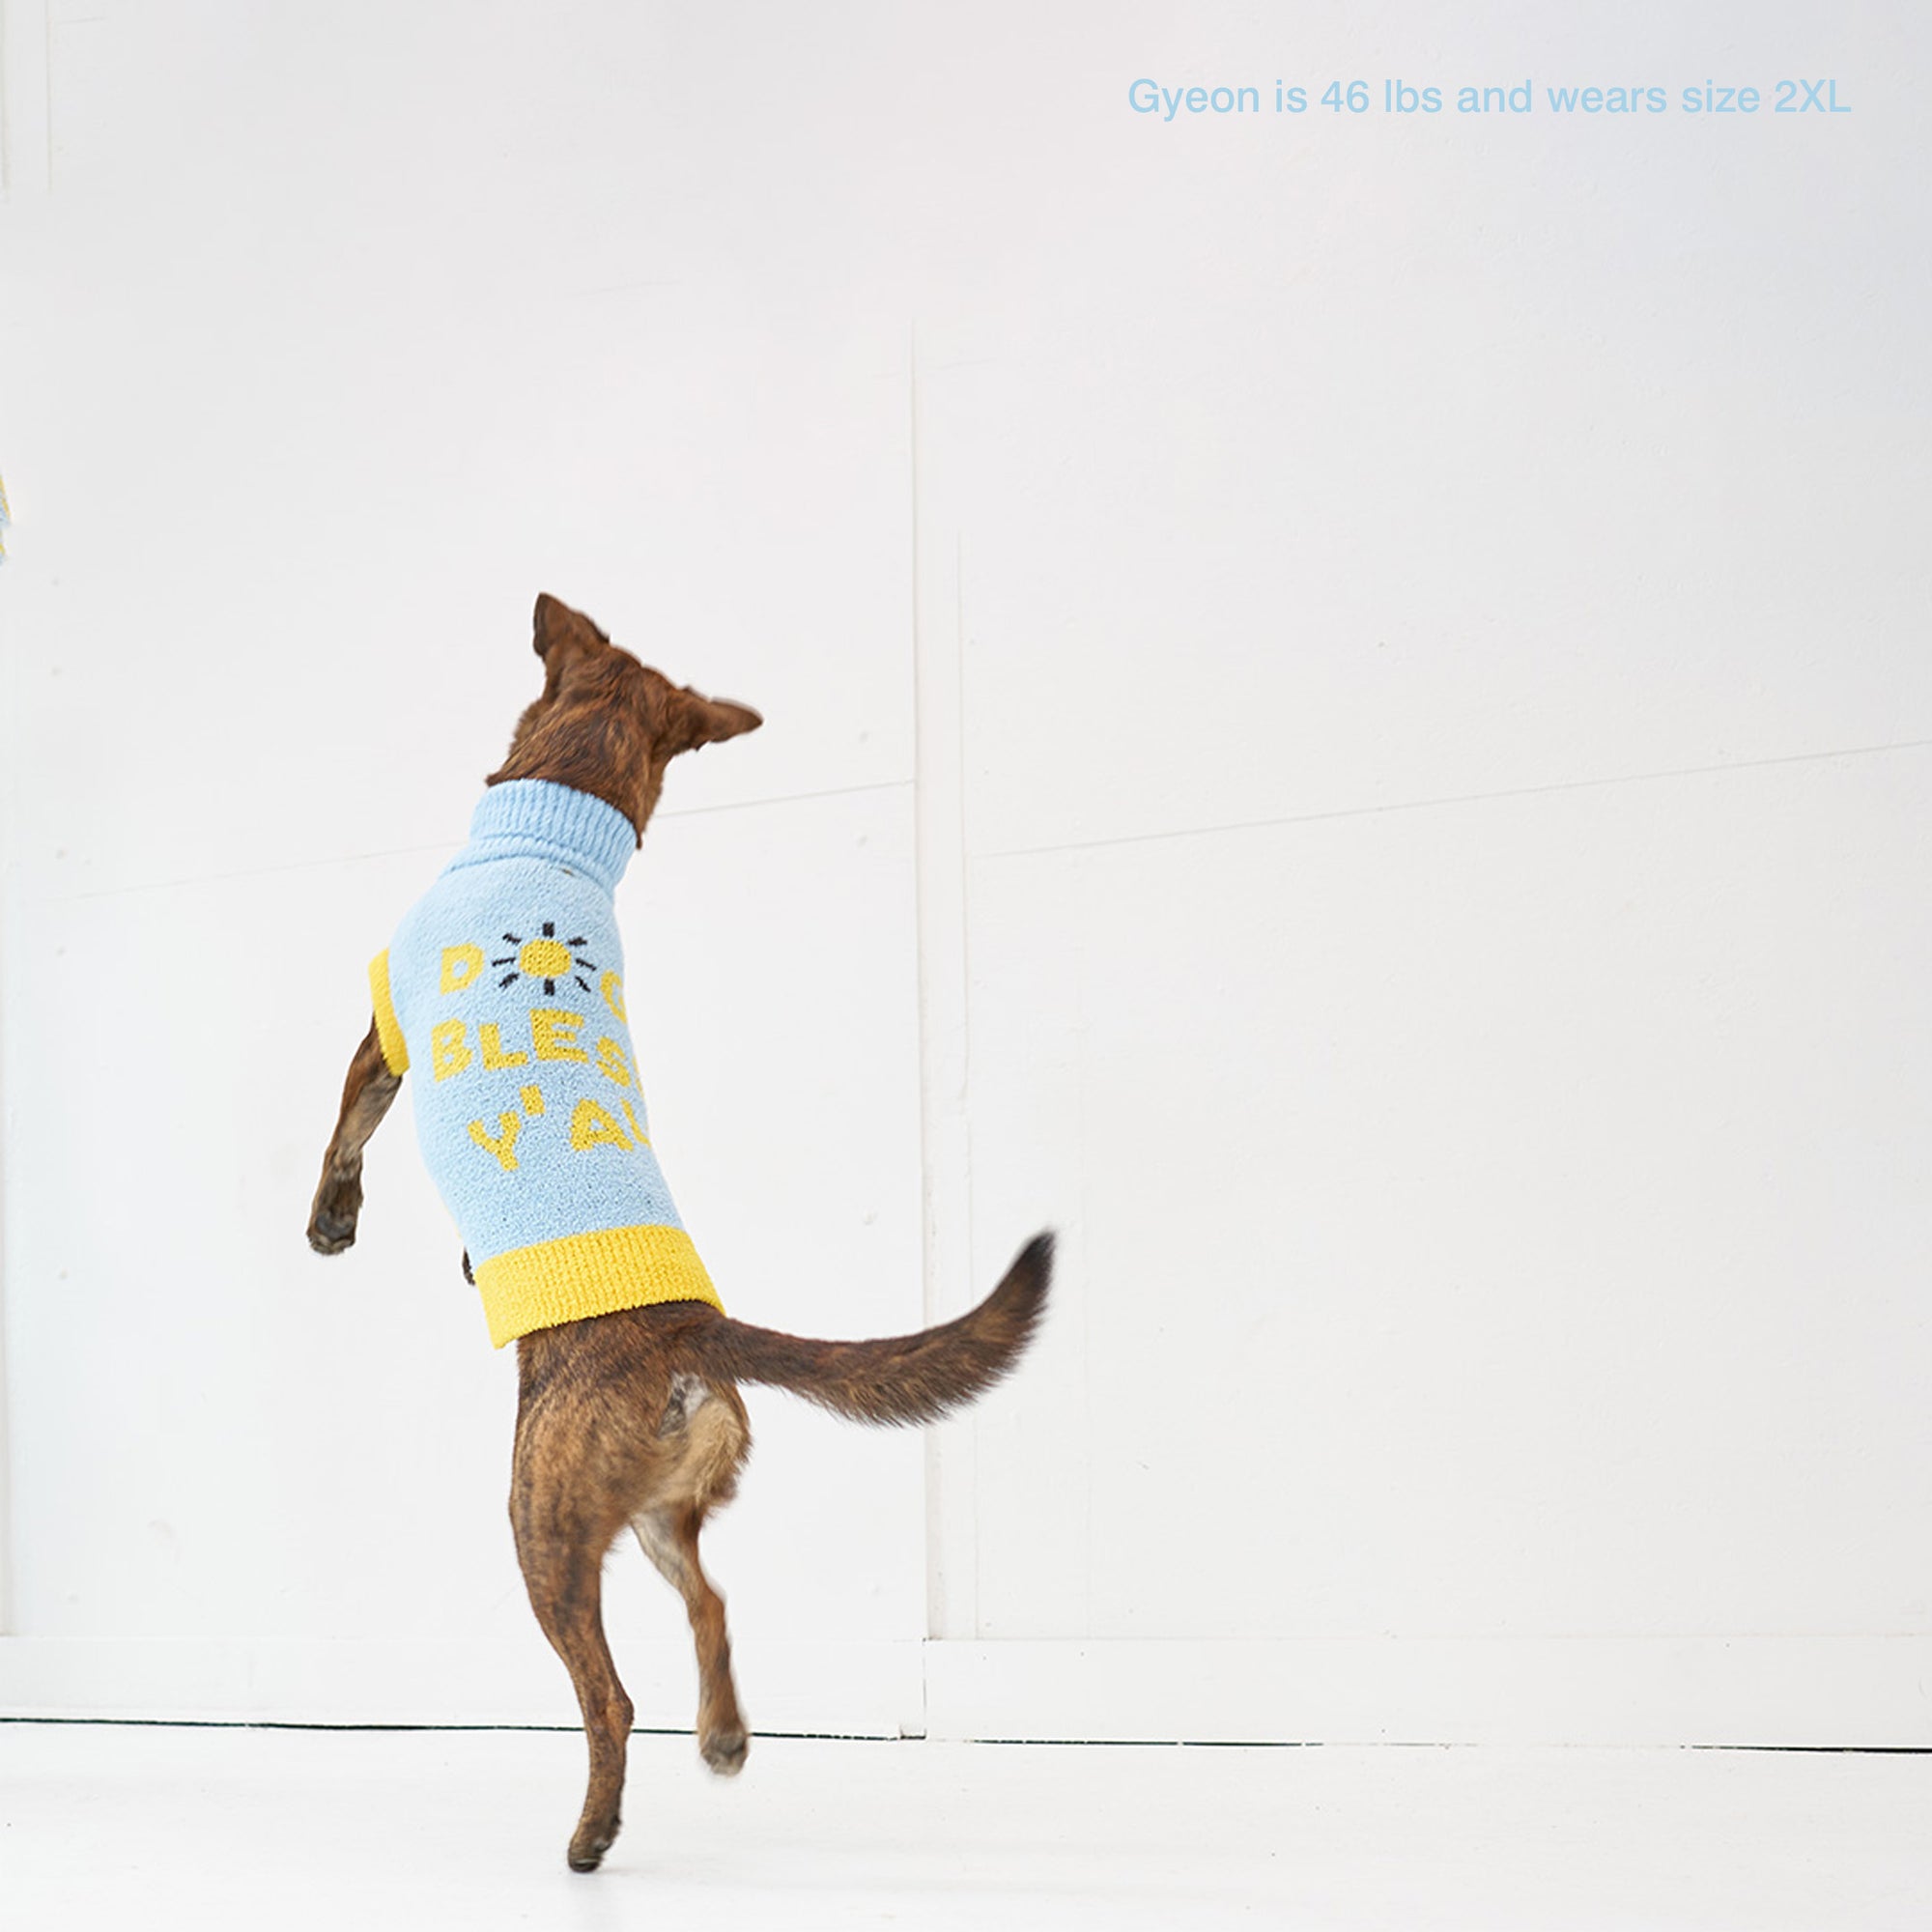 Dog named Gyeon, 46 lbs, in a 2XL "The Furryfolks" sweater, jumping up against a white wall.